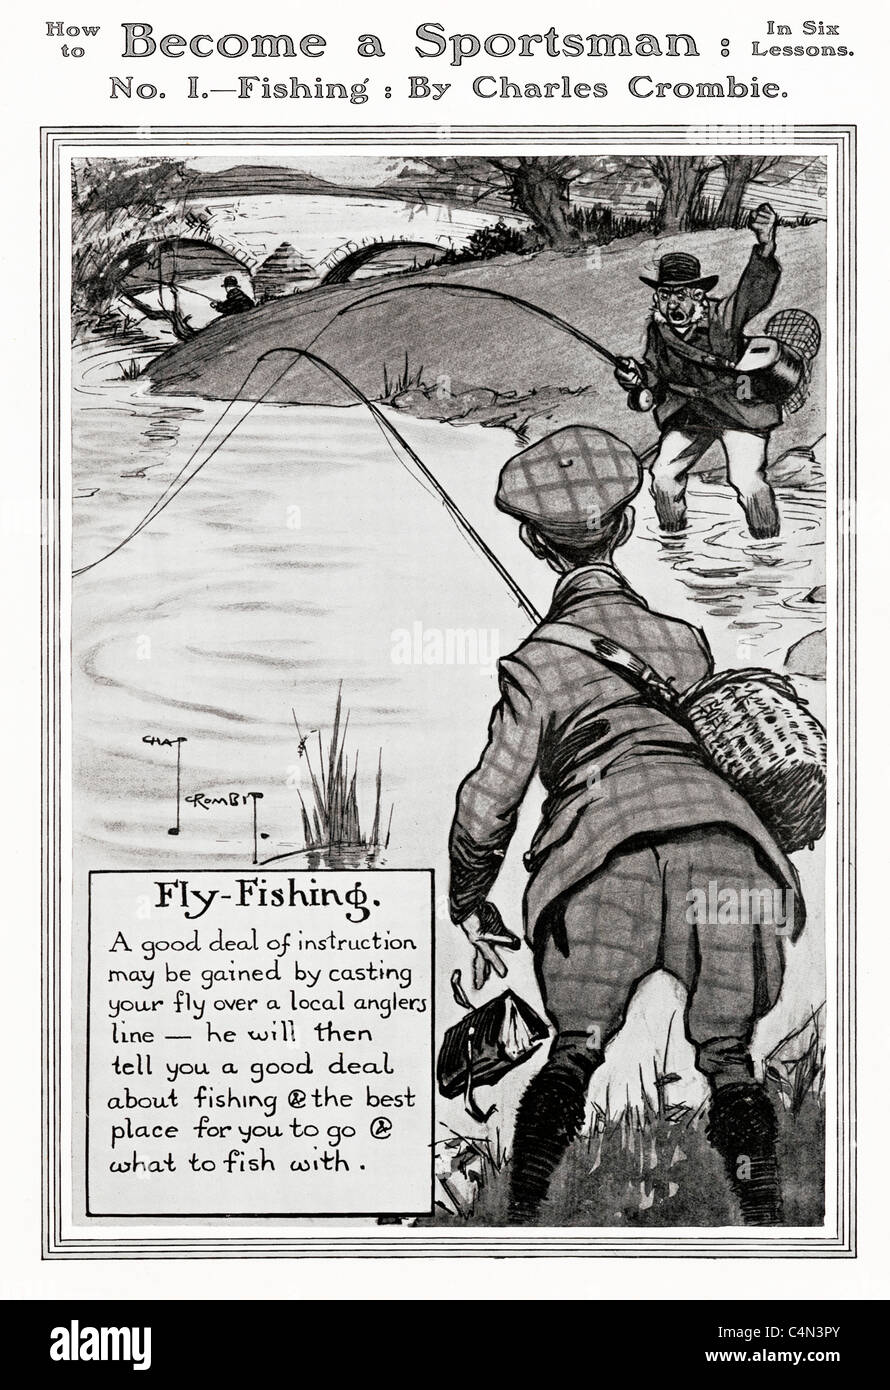 Become a Sportsman, Fishing, Edwardian advice for the fly-fisher, upset another angler and he will tell you where to go Stock Photo